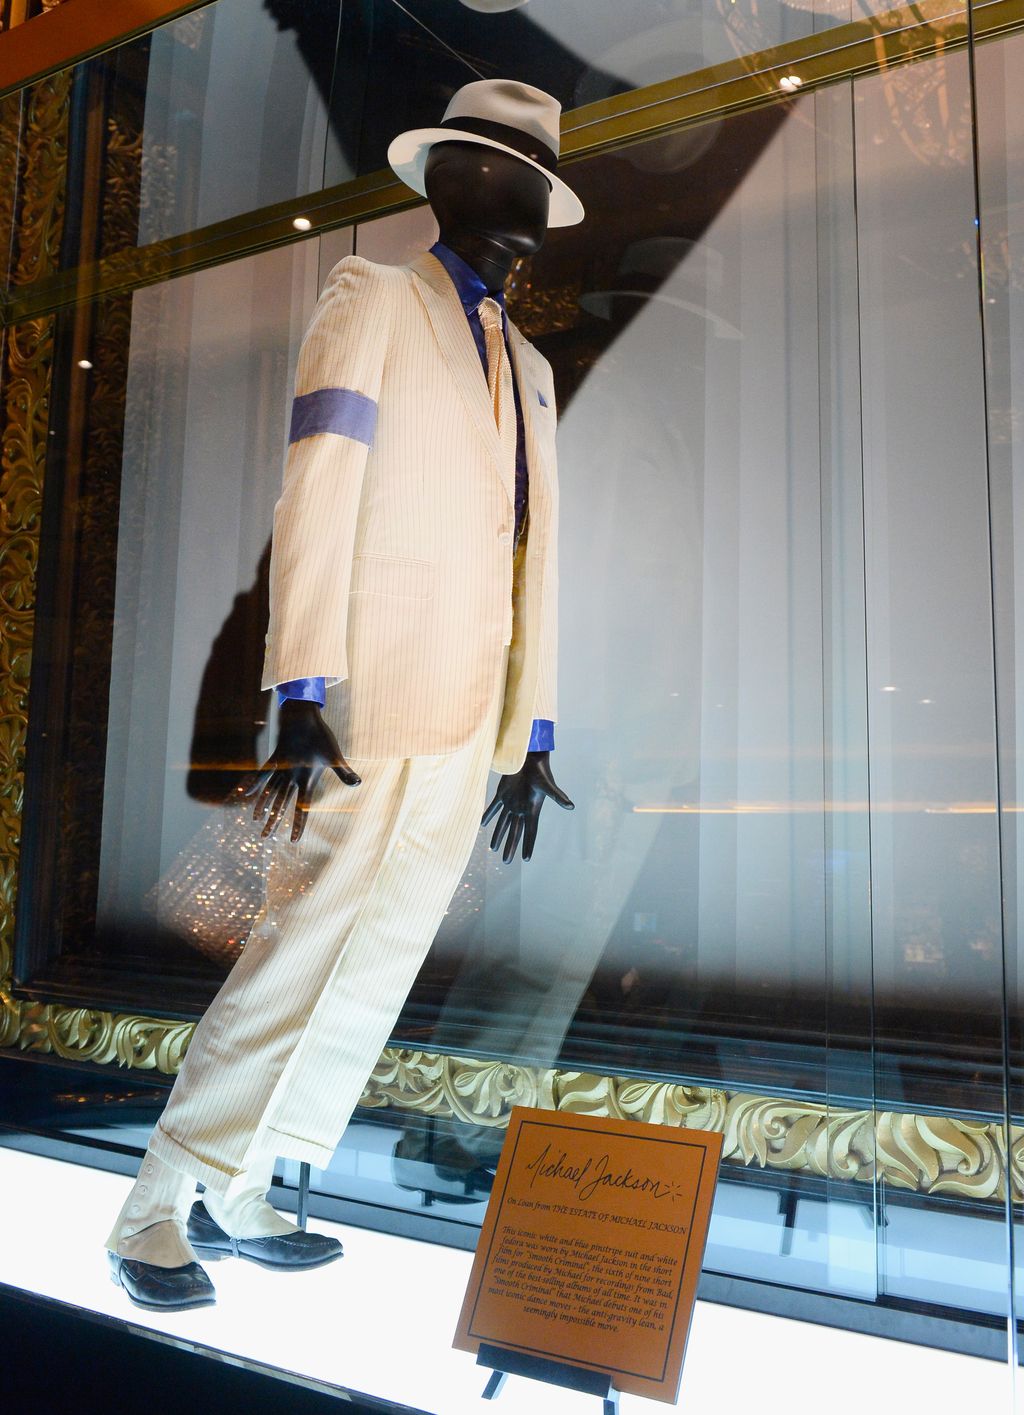 LAS VEGAS, NV - AUGUST 27:  Michael Jackson's outfit from his 